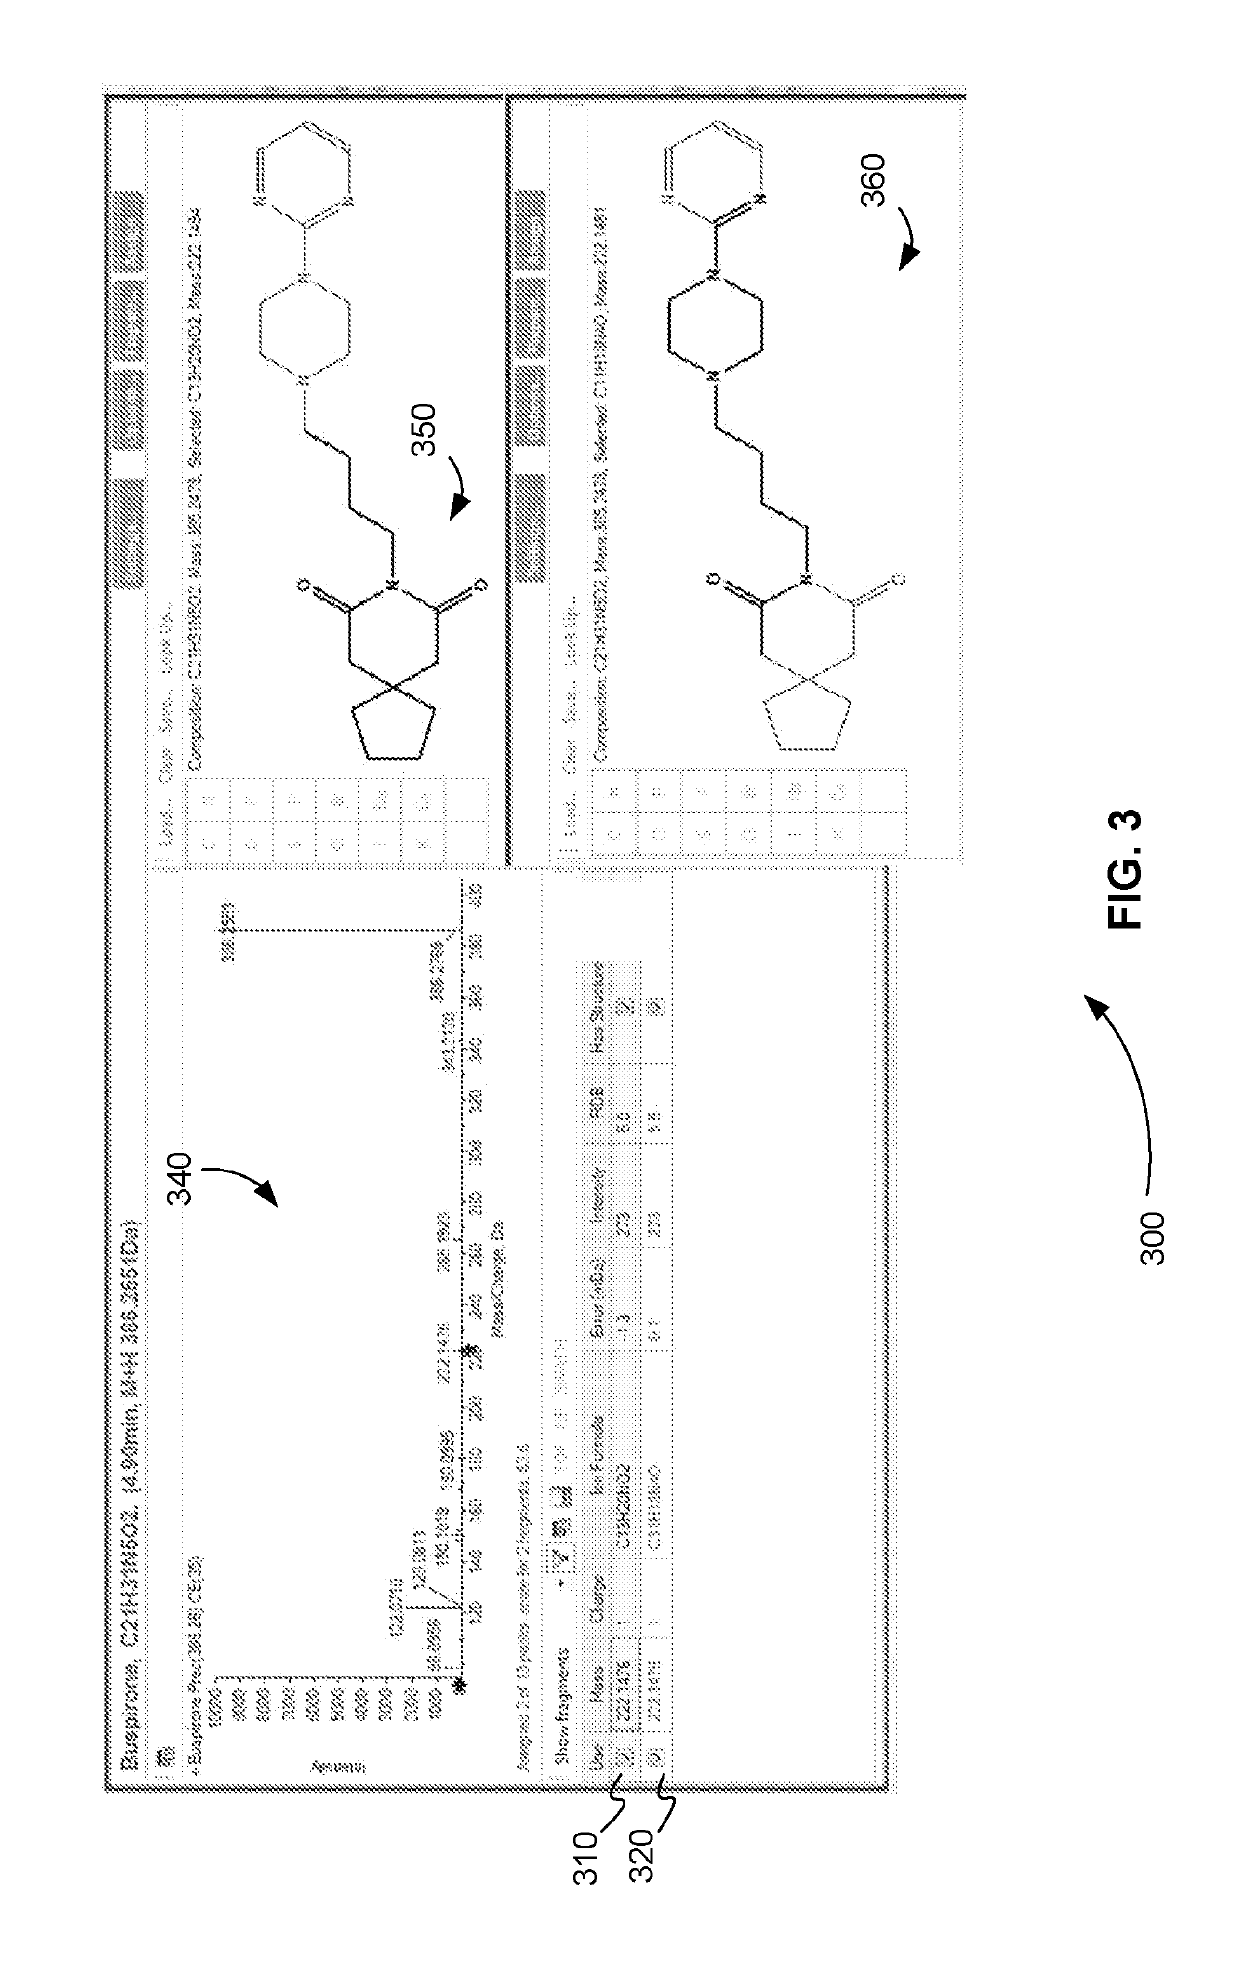 Method for converting mass spectral libraries into accurate mass spectral libraries